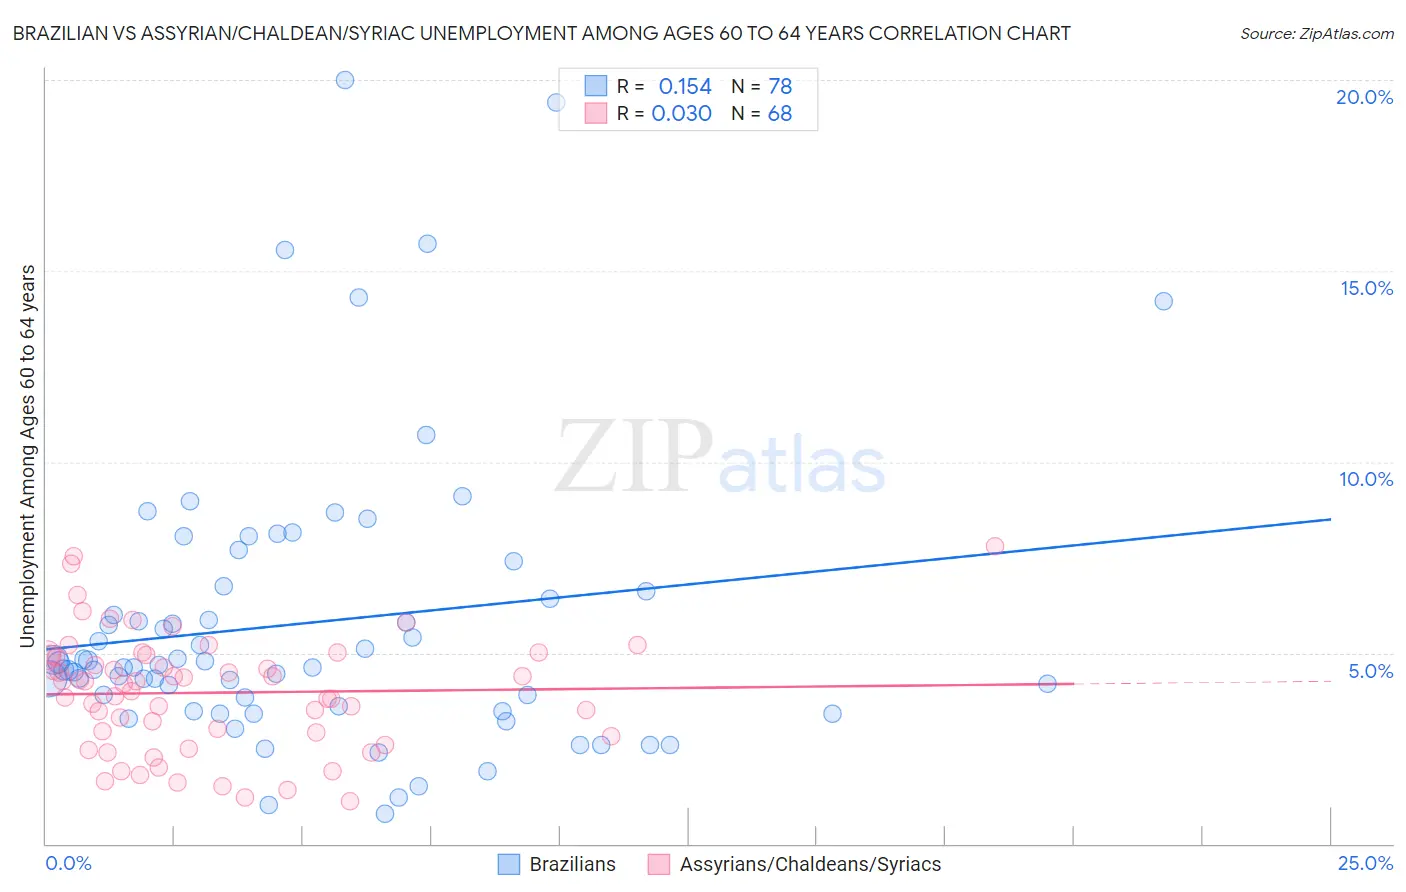 Brazilian vs Assyrian/Chaldean/Syriac Unemployment Among Ages 60 to 64 years